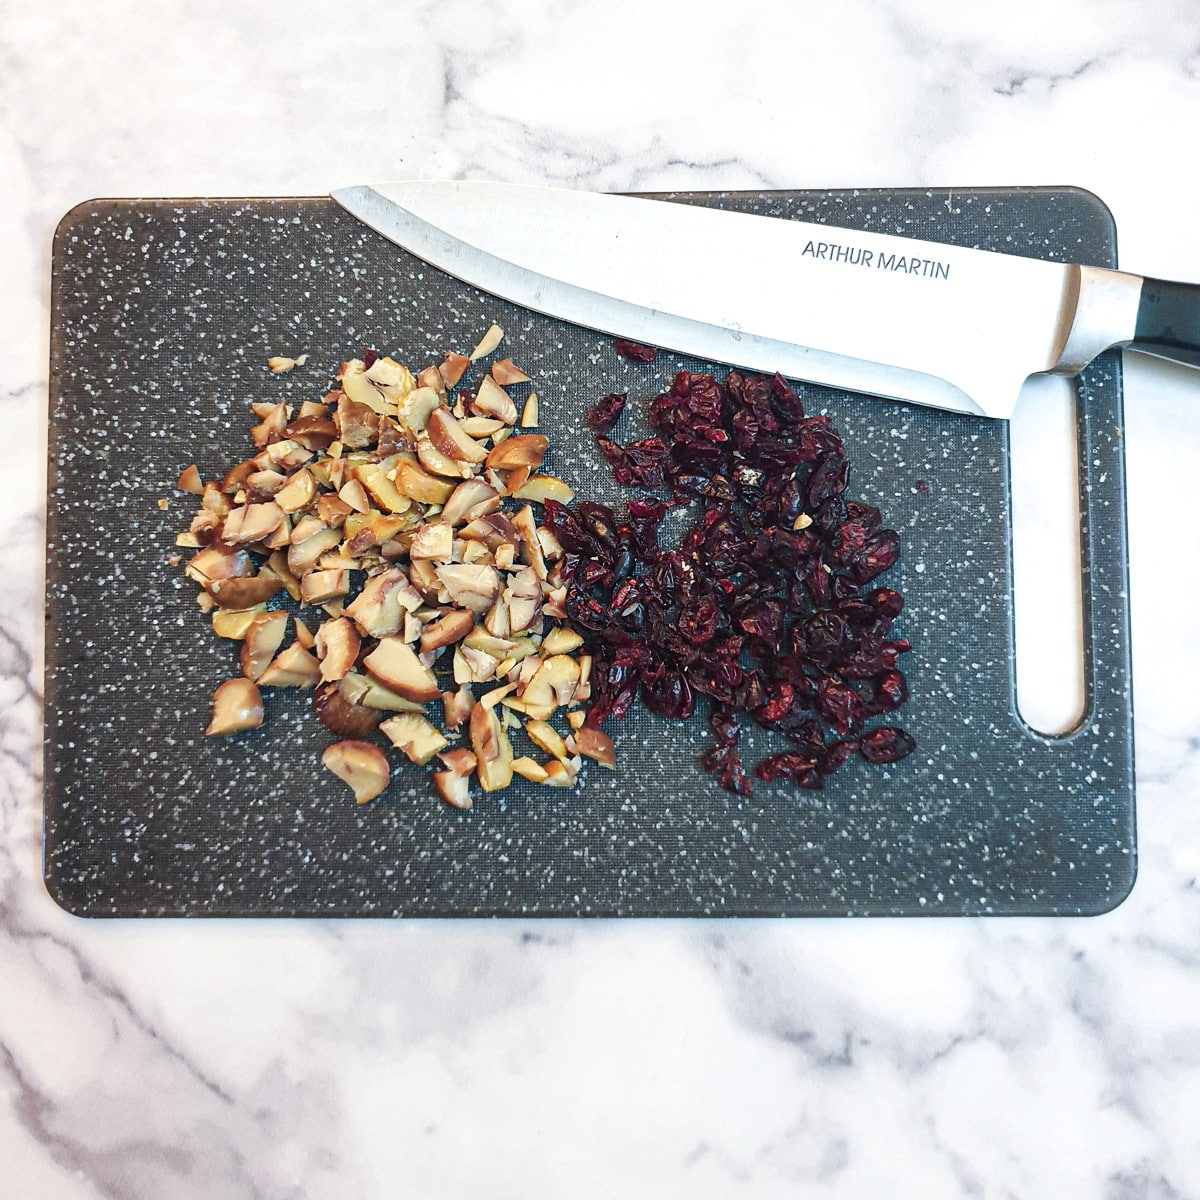 Cranberries and chestnuts being chopped on a blue chopping board with a knife.